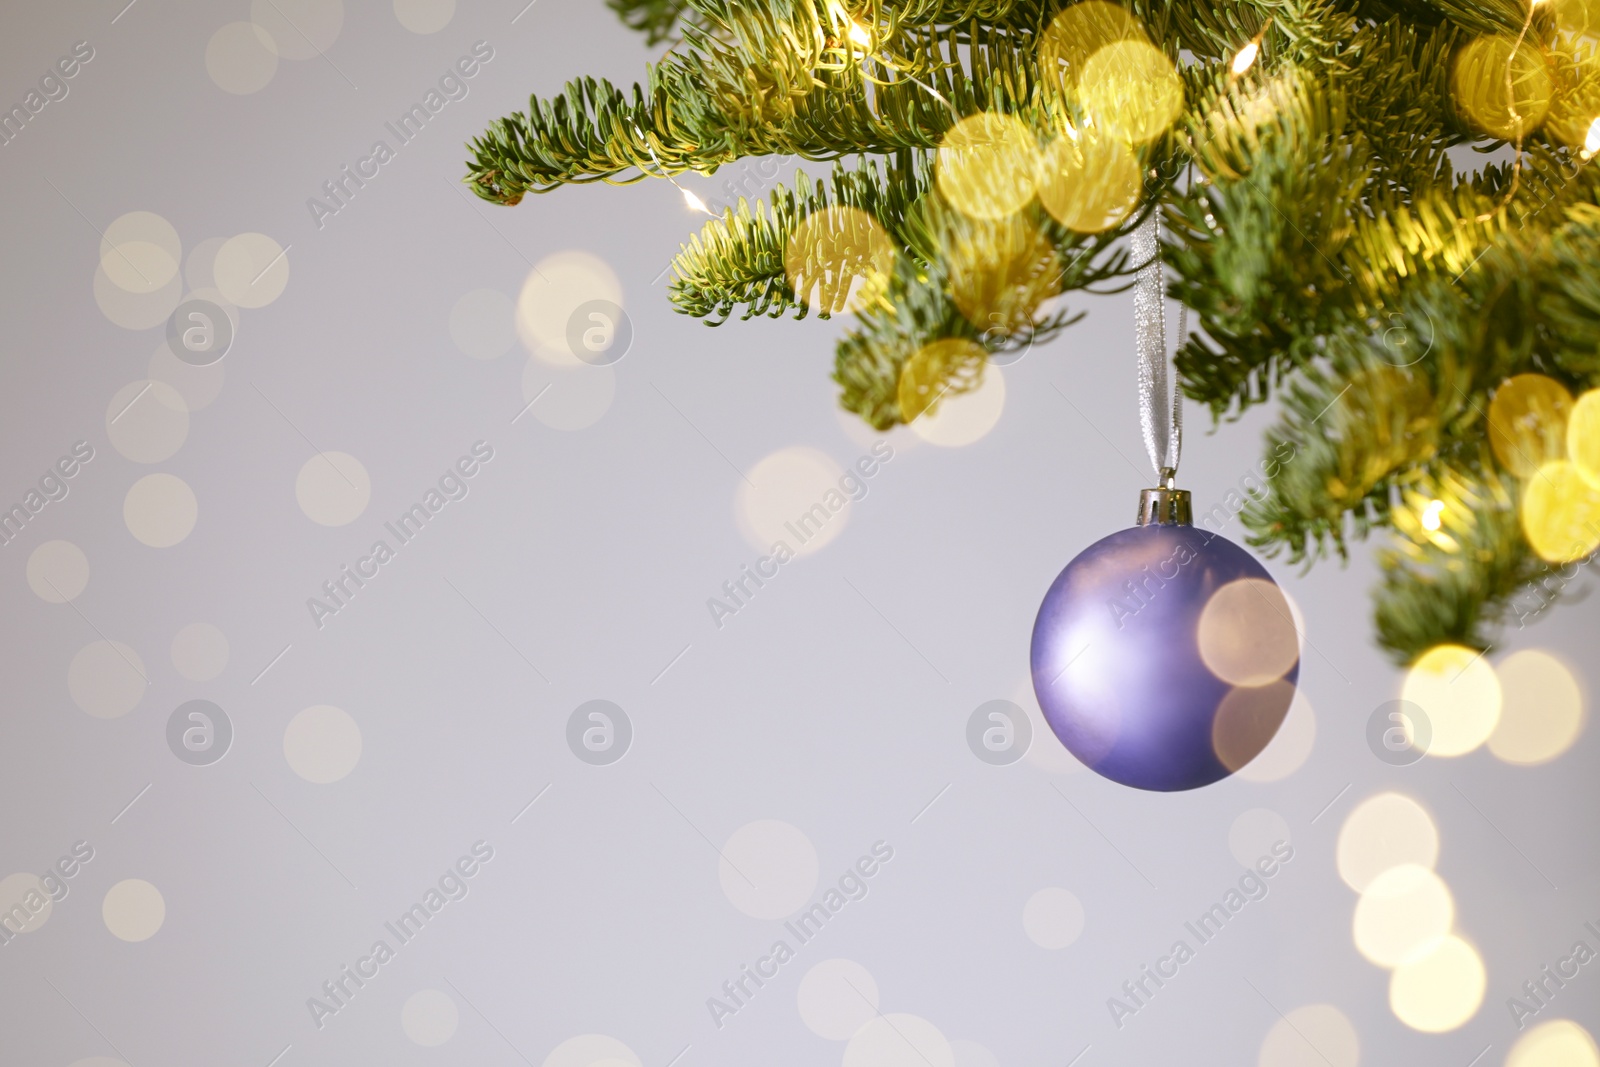 Image of Beautiful Christmas ball hanging on fir tree branch against light background, space for text. Bokeh effect